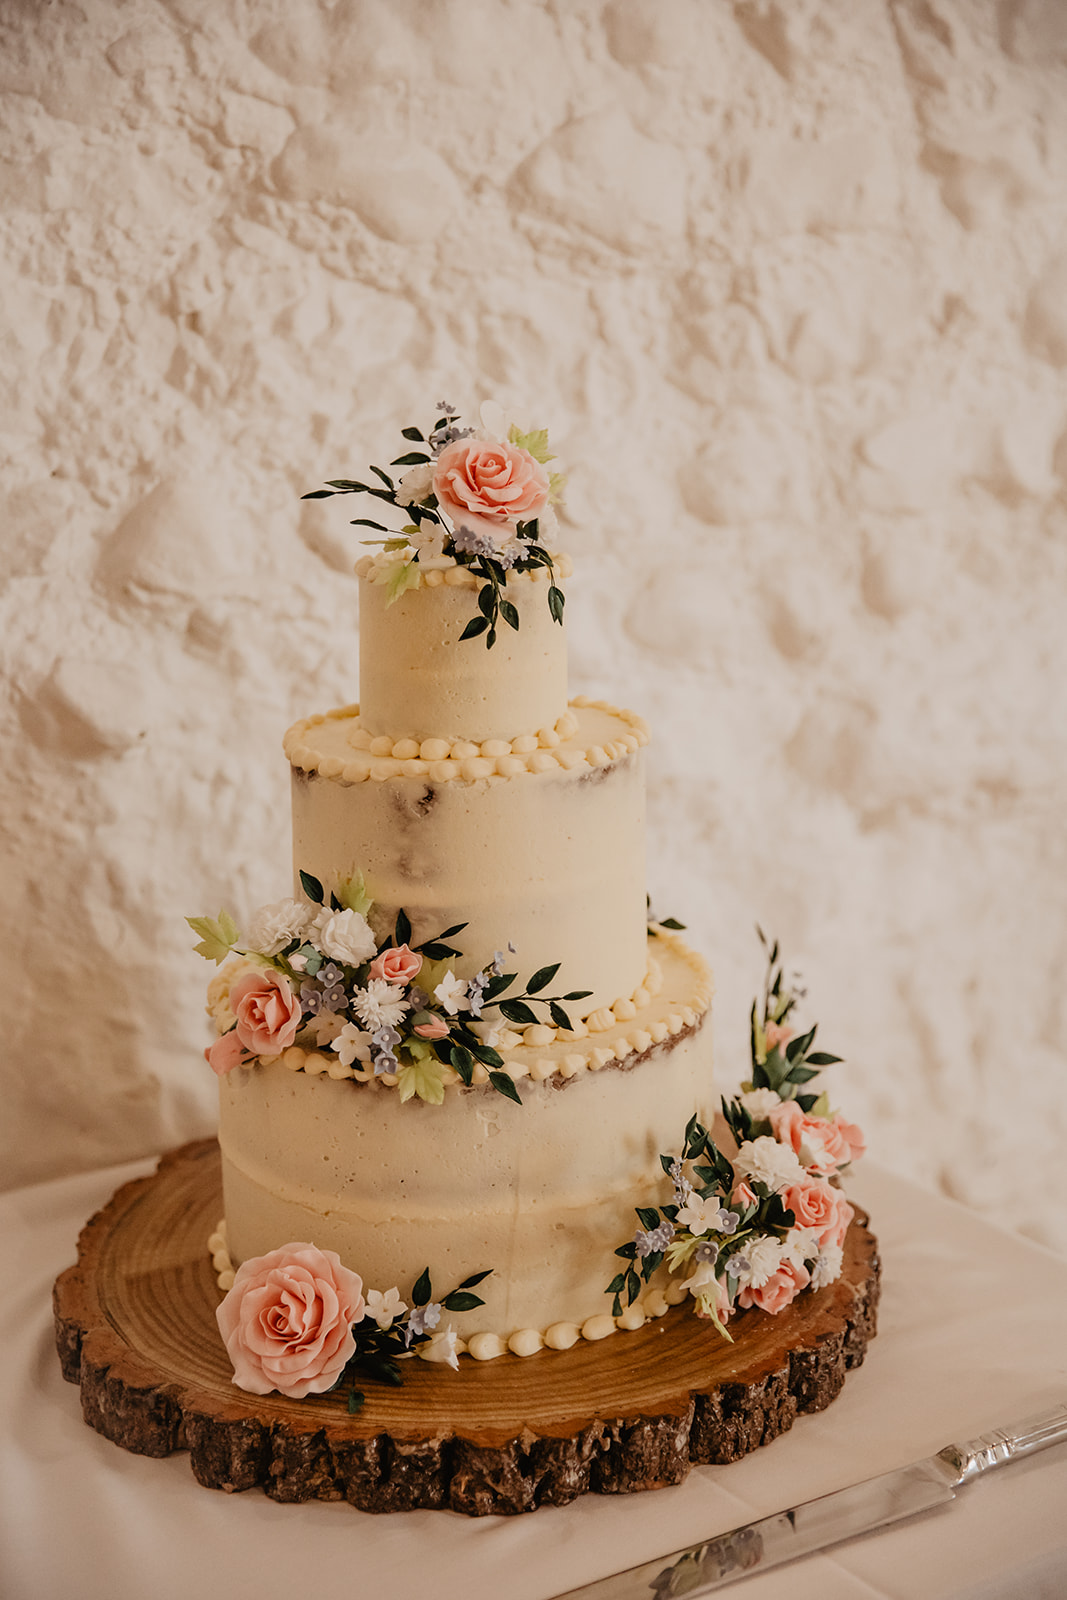 Wedding cake at a Field Place Manor House Wedding in Worthing, Sussex. By Olive Joy Photography